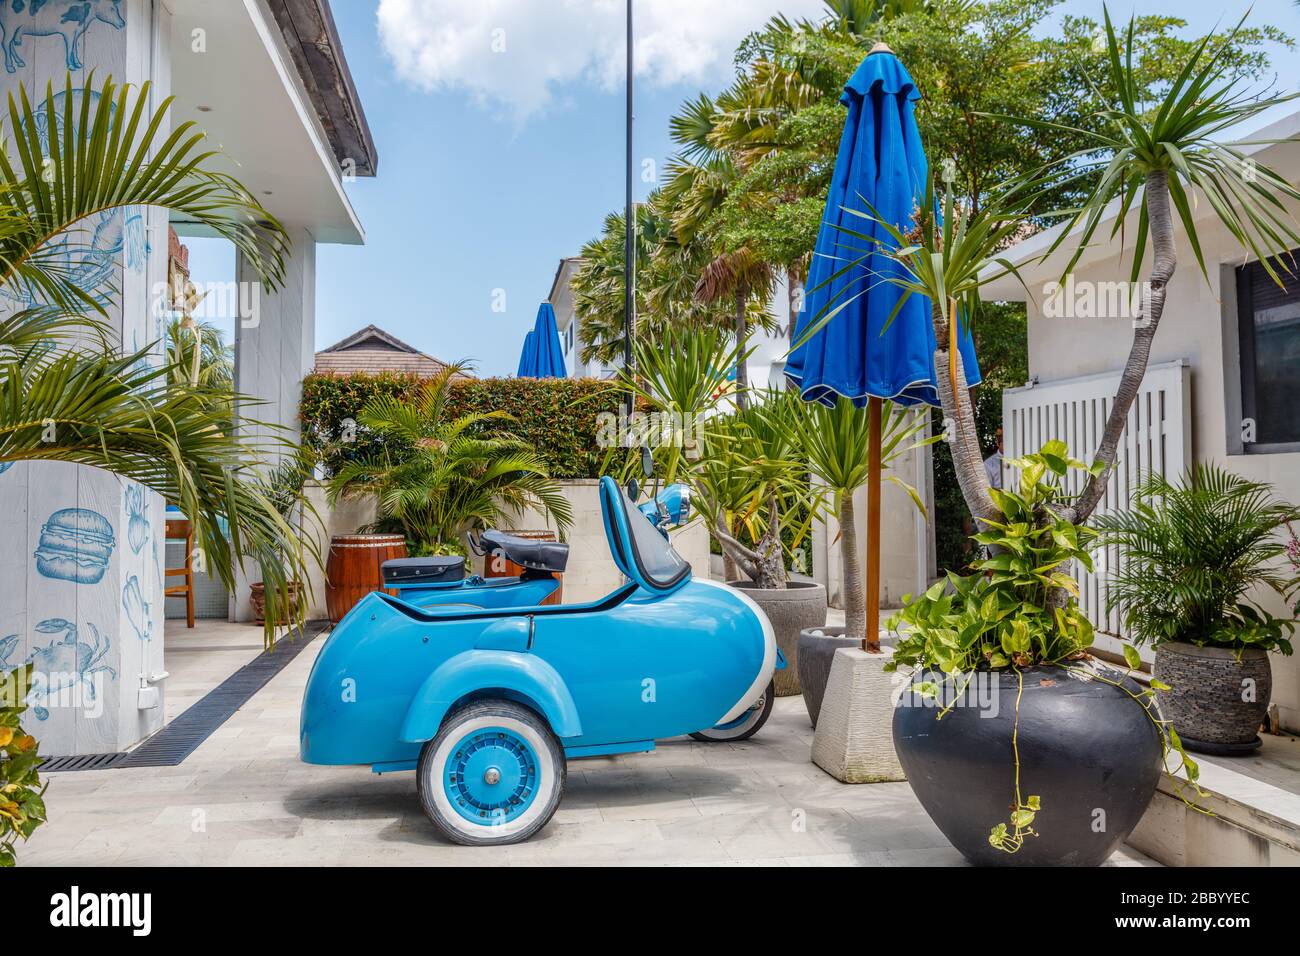 Brand new sky blue stylish moped with a sidecar. Blue sun umbrellas. Stock Photo